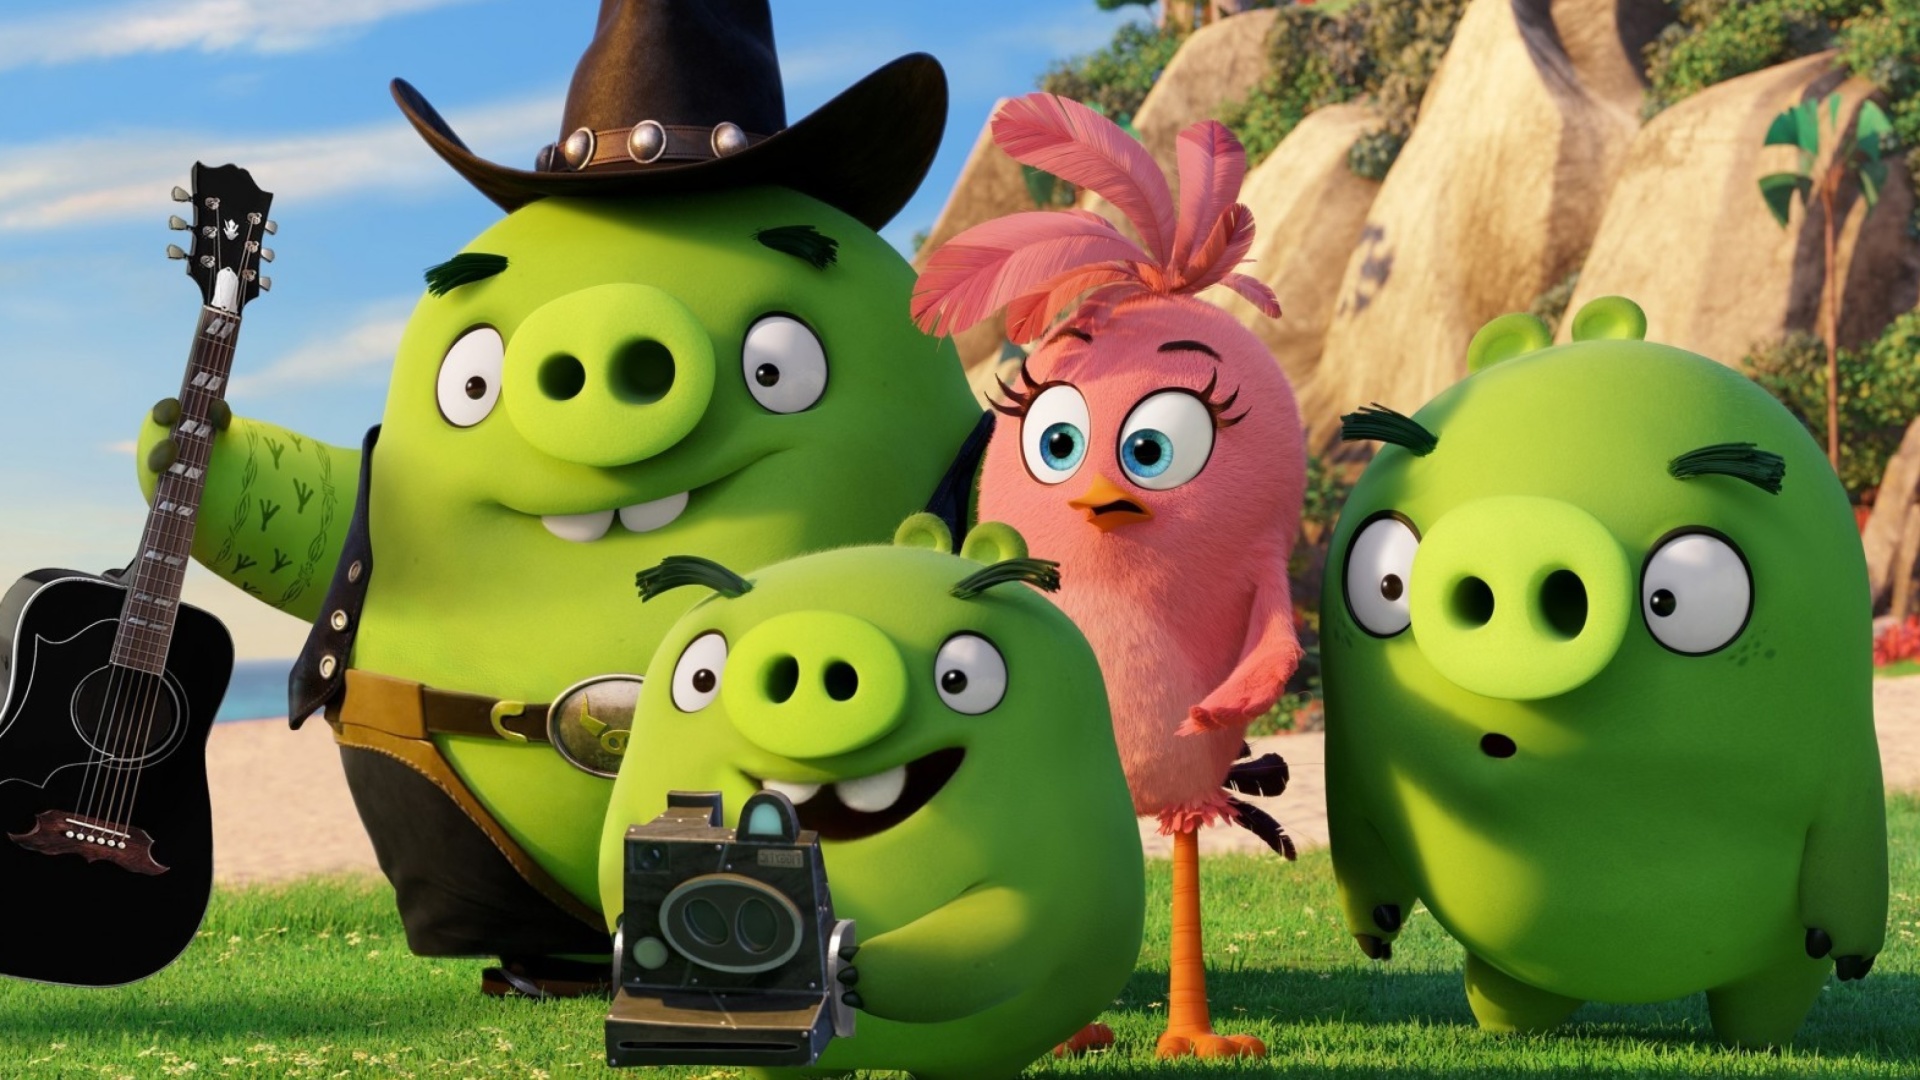 The Angry Birds Movie Pigs wallpaper 1920x1080